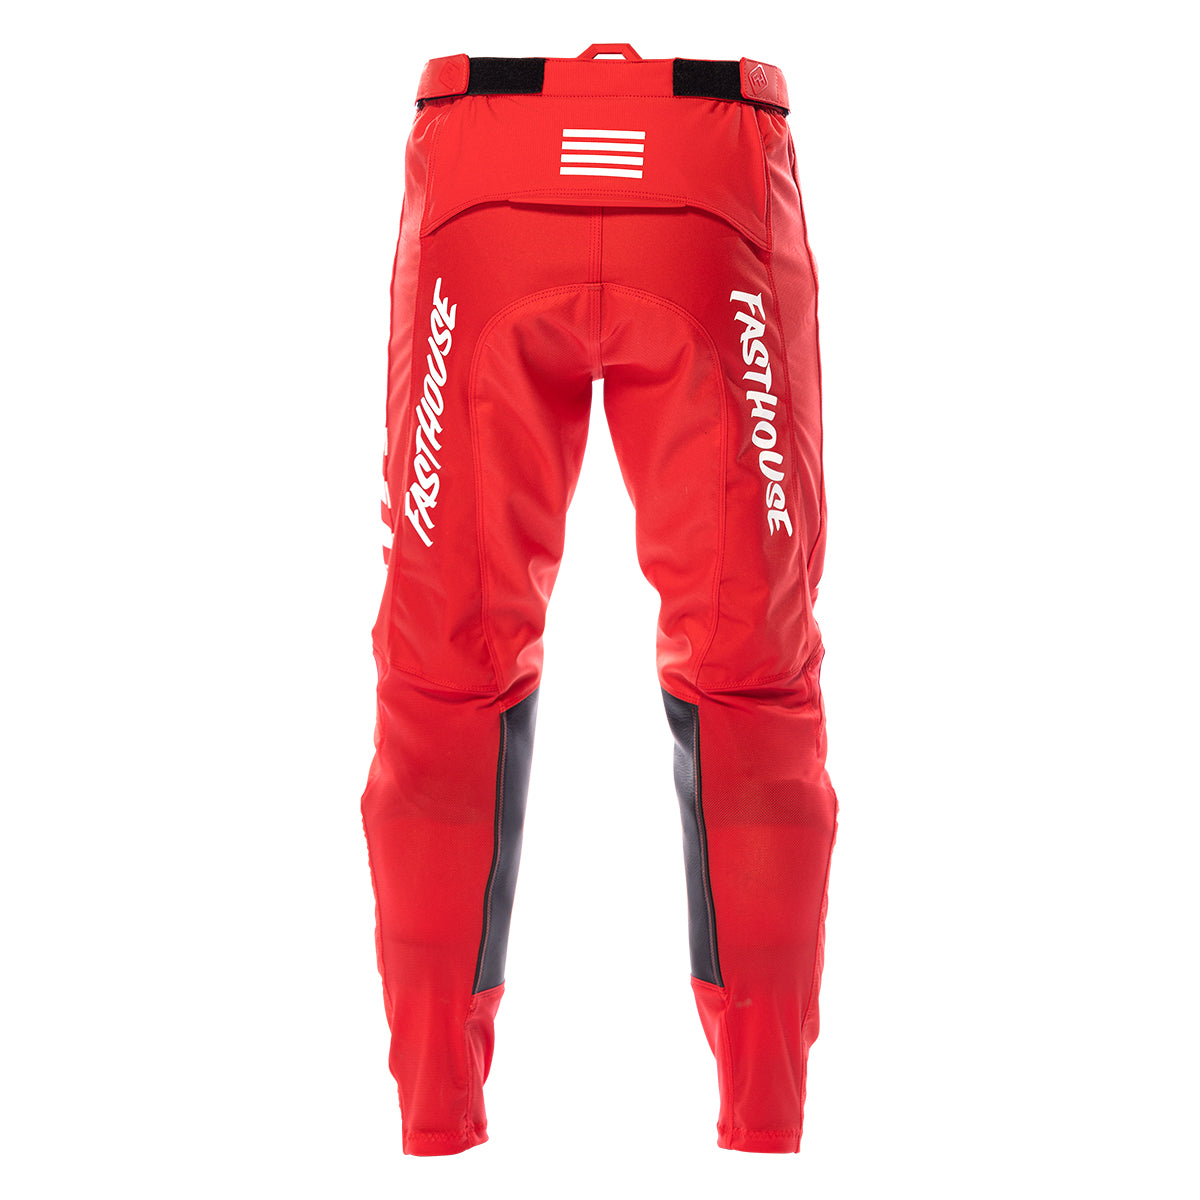 Elrod Pant - Red